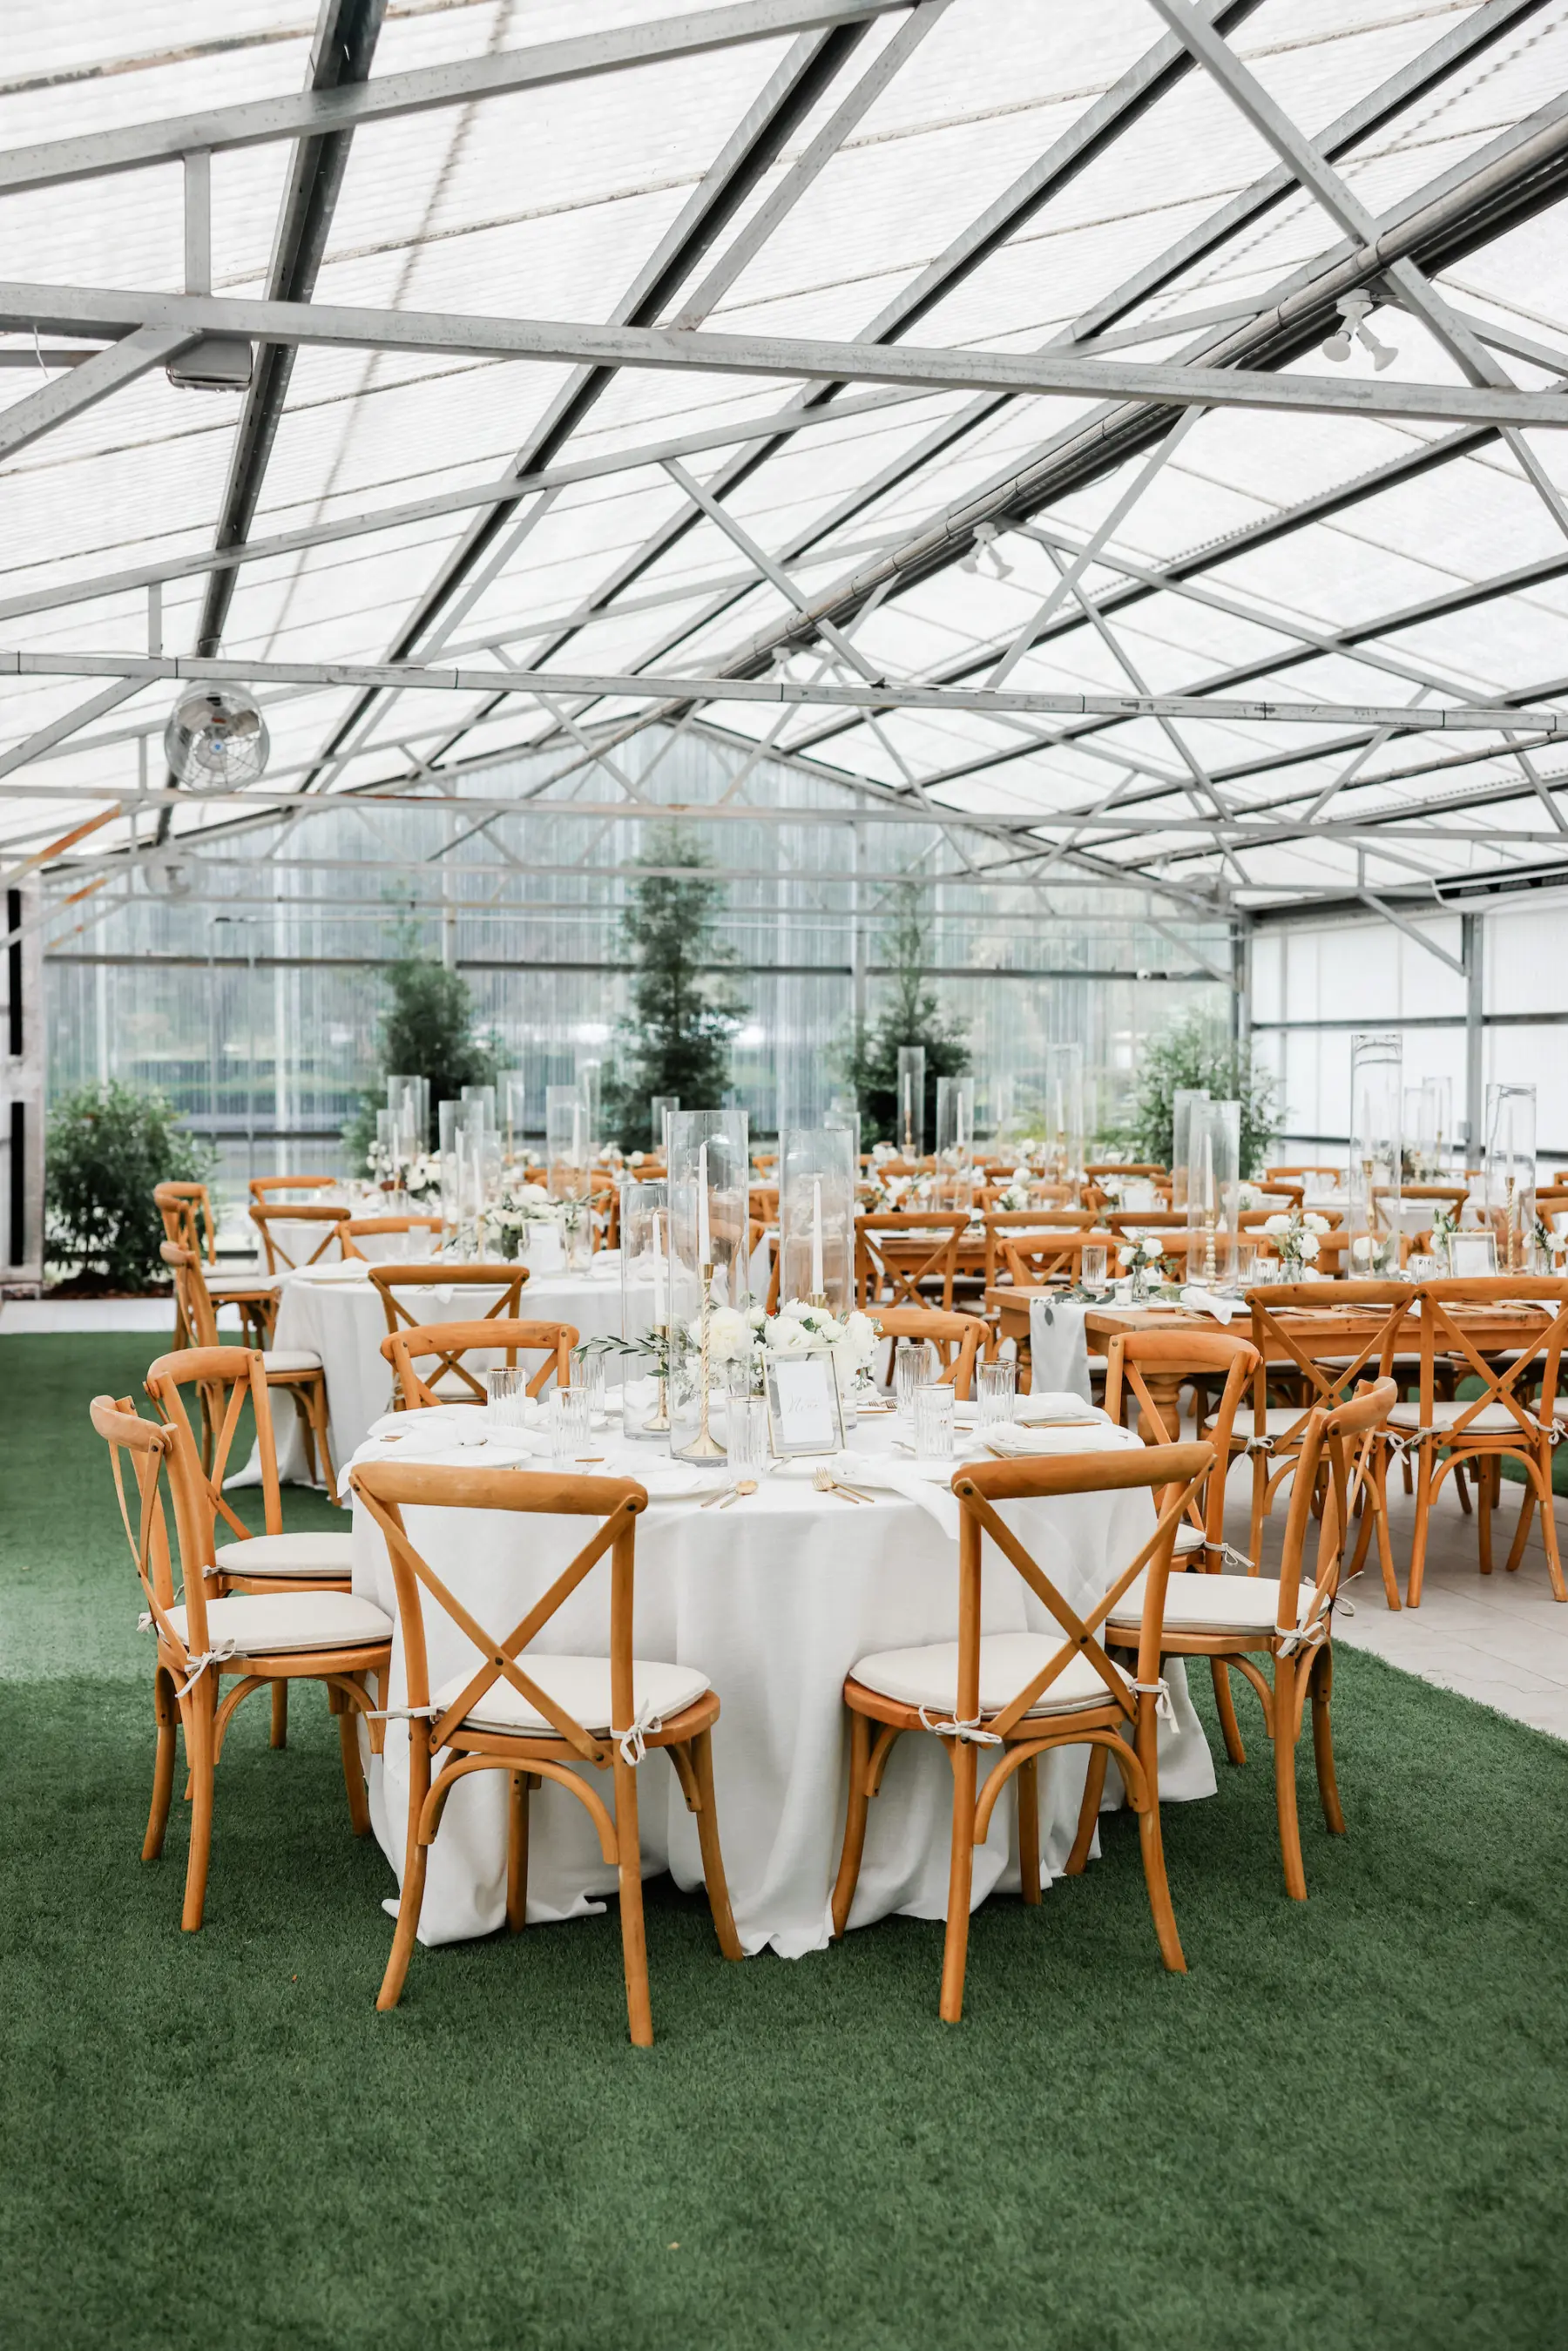 Clear Tented Classic White and Gold Wedding Reception Inspiration | Wooden Tables and Crossback Chairs | Tampa Bay Kate Ryan Event Rentals